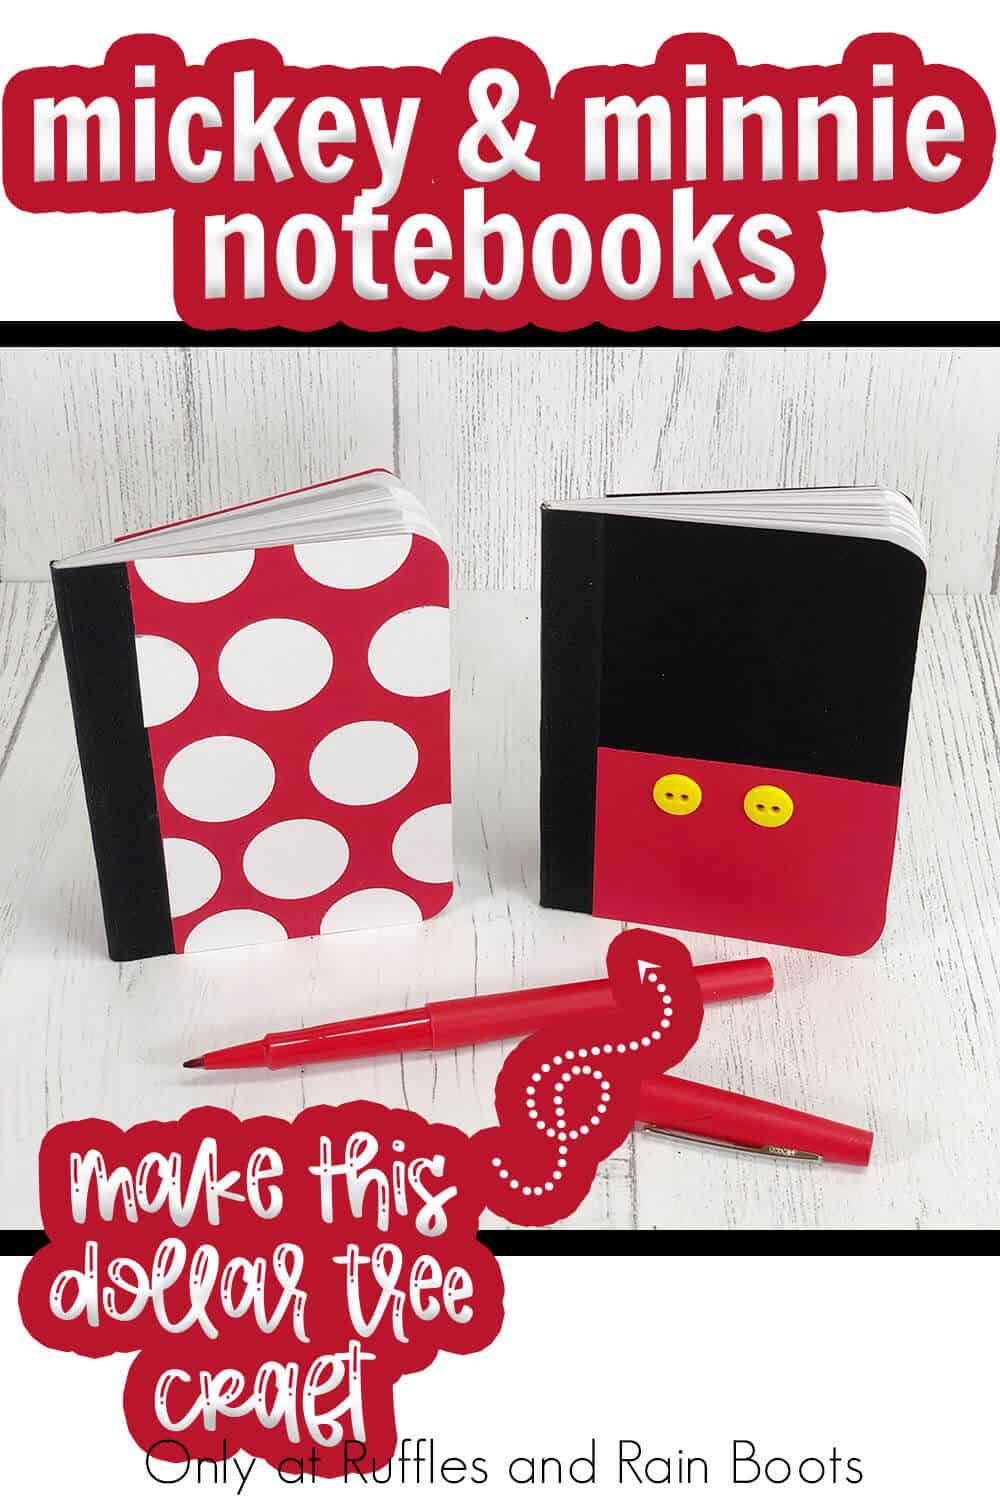 diy dollar tree mickey mouse notebook tutorial with text which reads mickey & minnie notebooks make this dollar tree craft